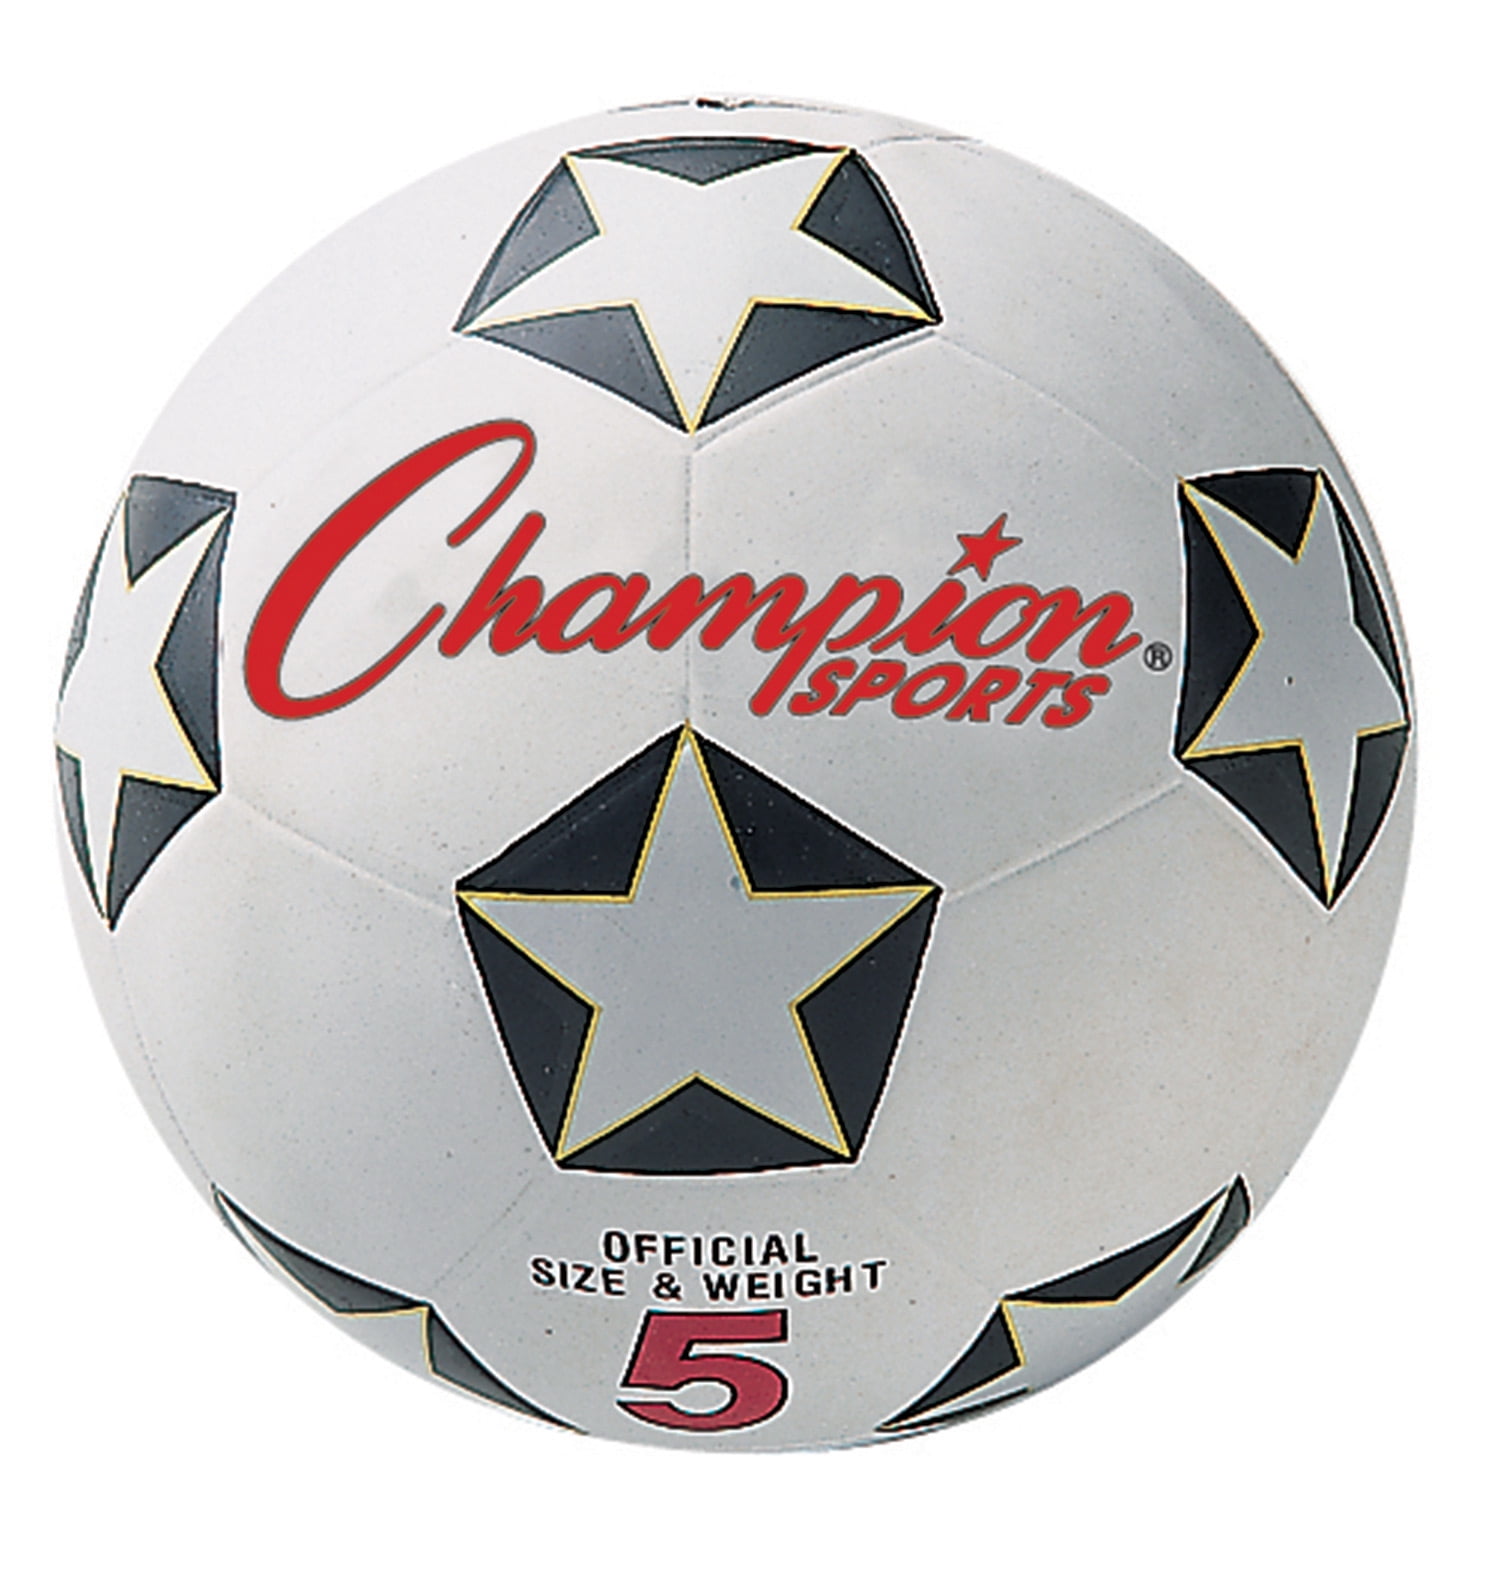 Champion Sports Rubber Soccer Ball Size